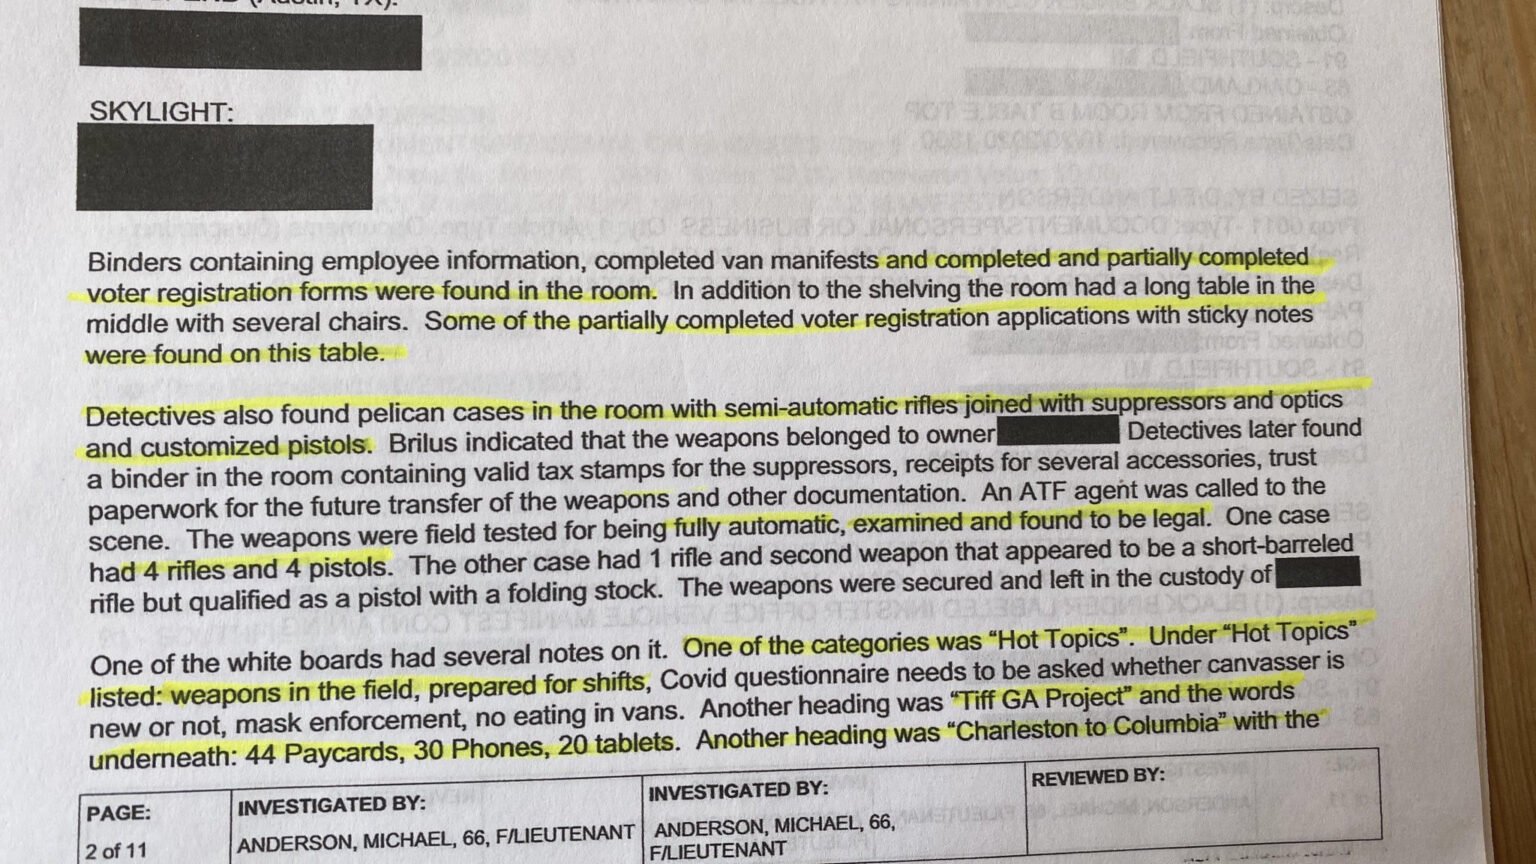 Excerpt from Michigan State Police report